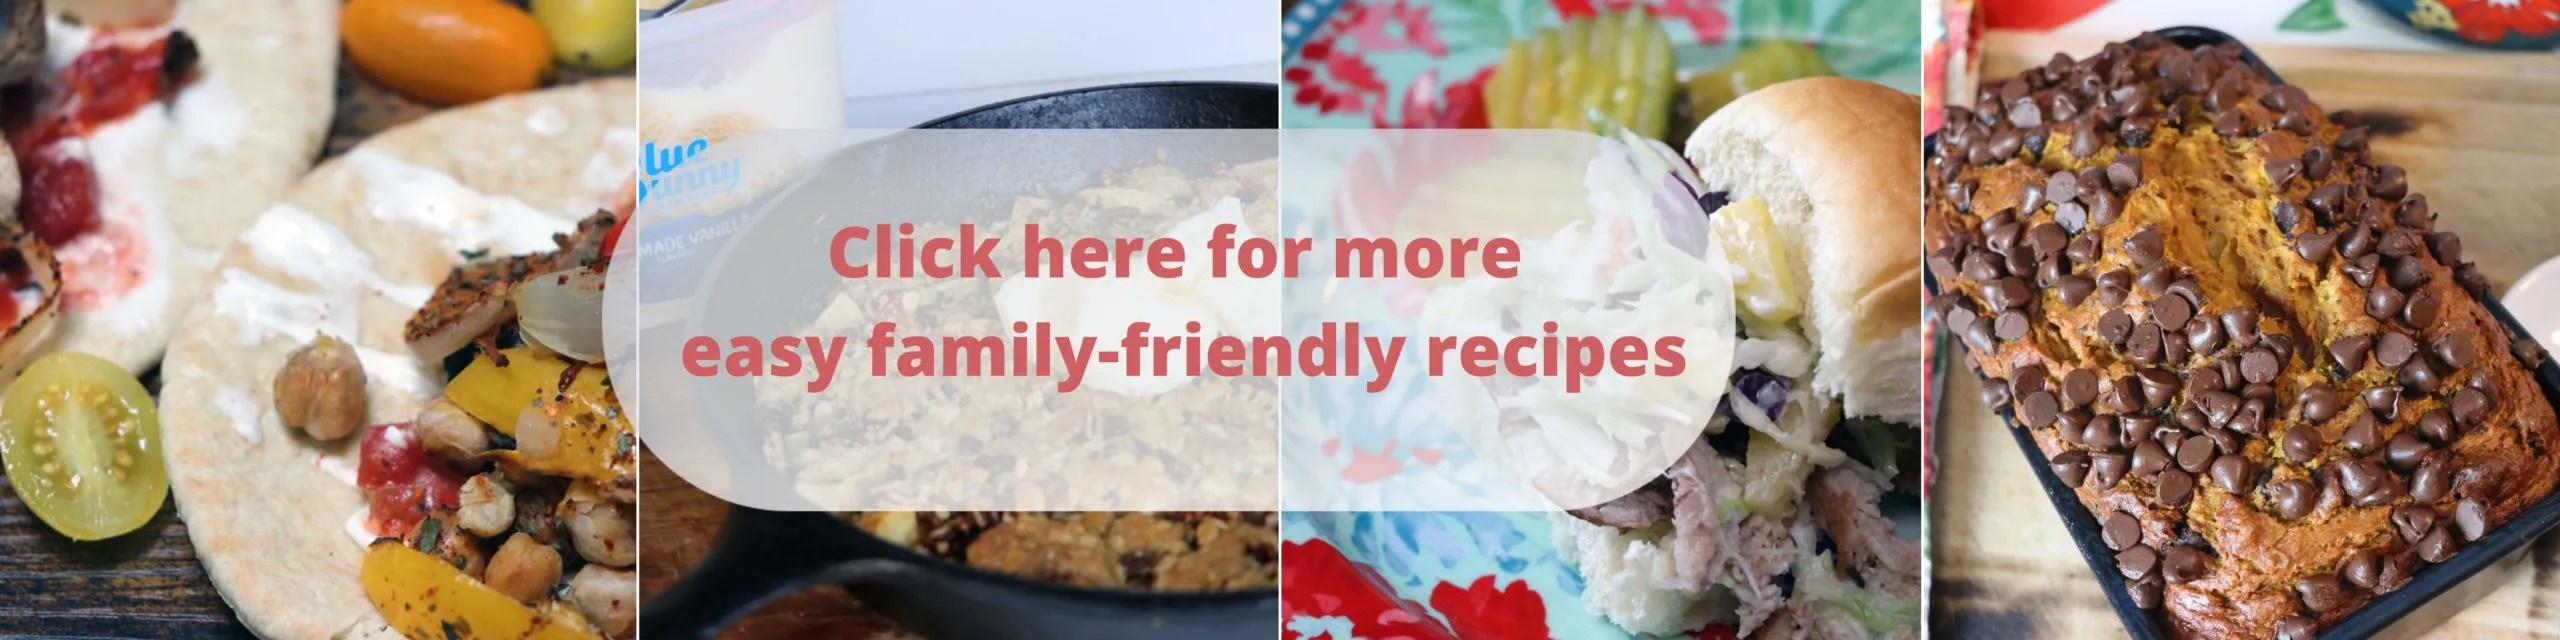 More family friendly recipes available here